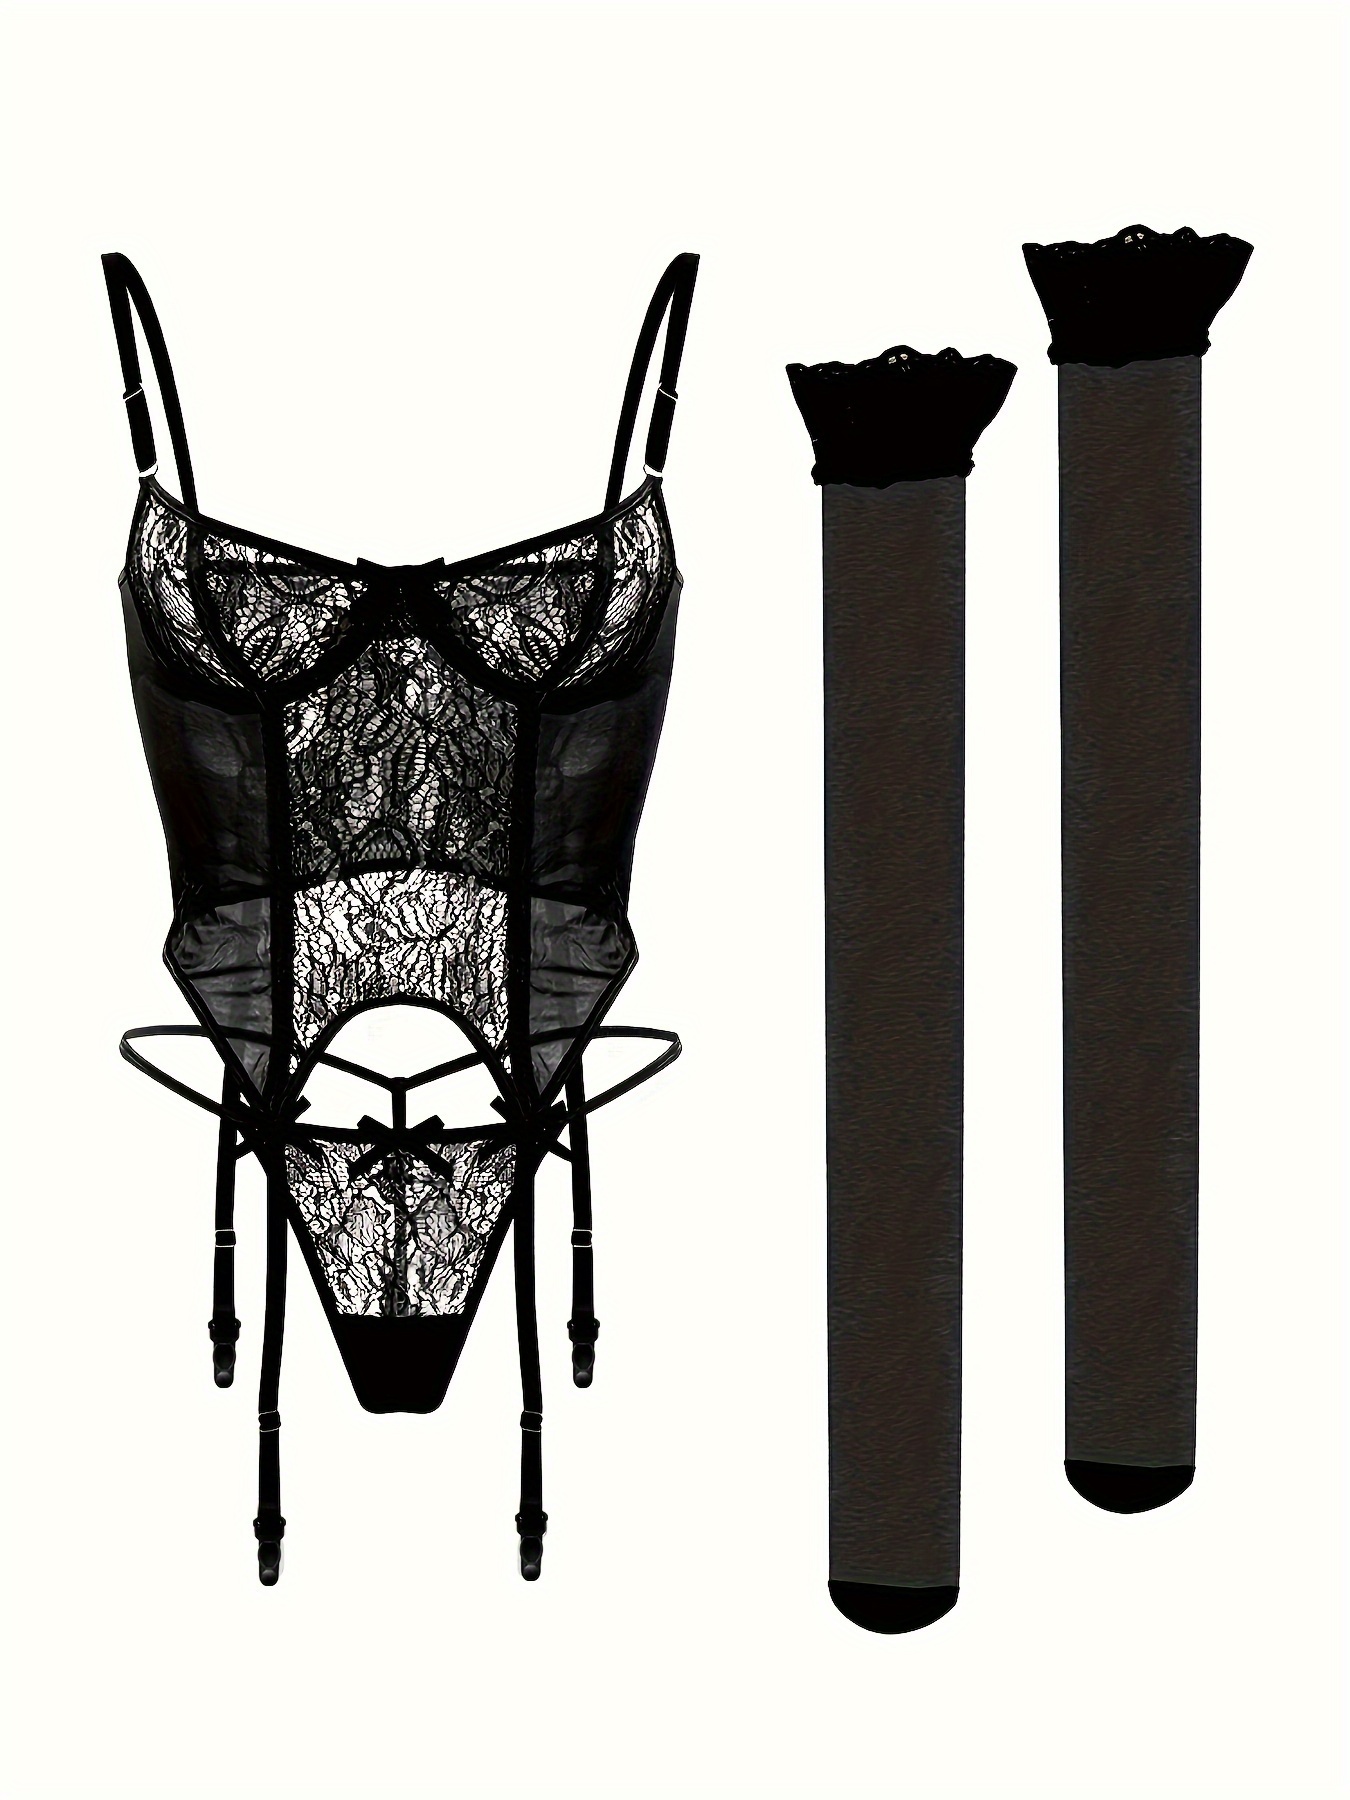 Sexy Floral Mesh Lingerie Set, Sheer Lace Bra & Garter Belt G-String With  Lace Stockings, Women's Sexy Lingerie & Underwear